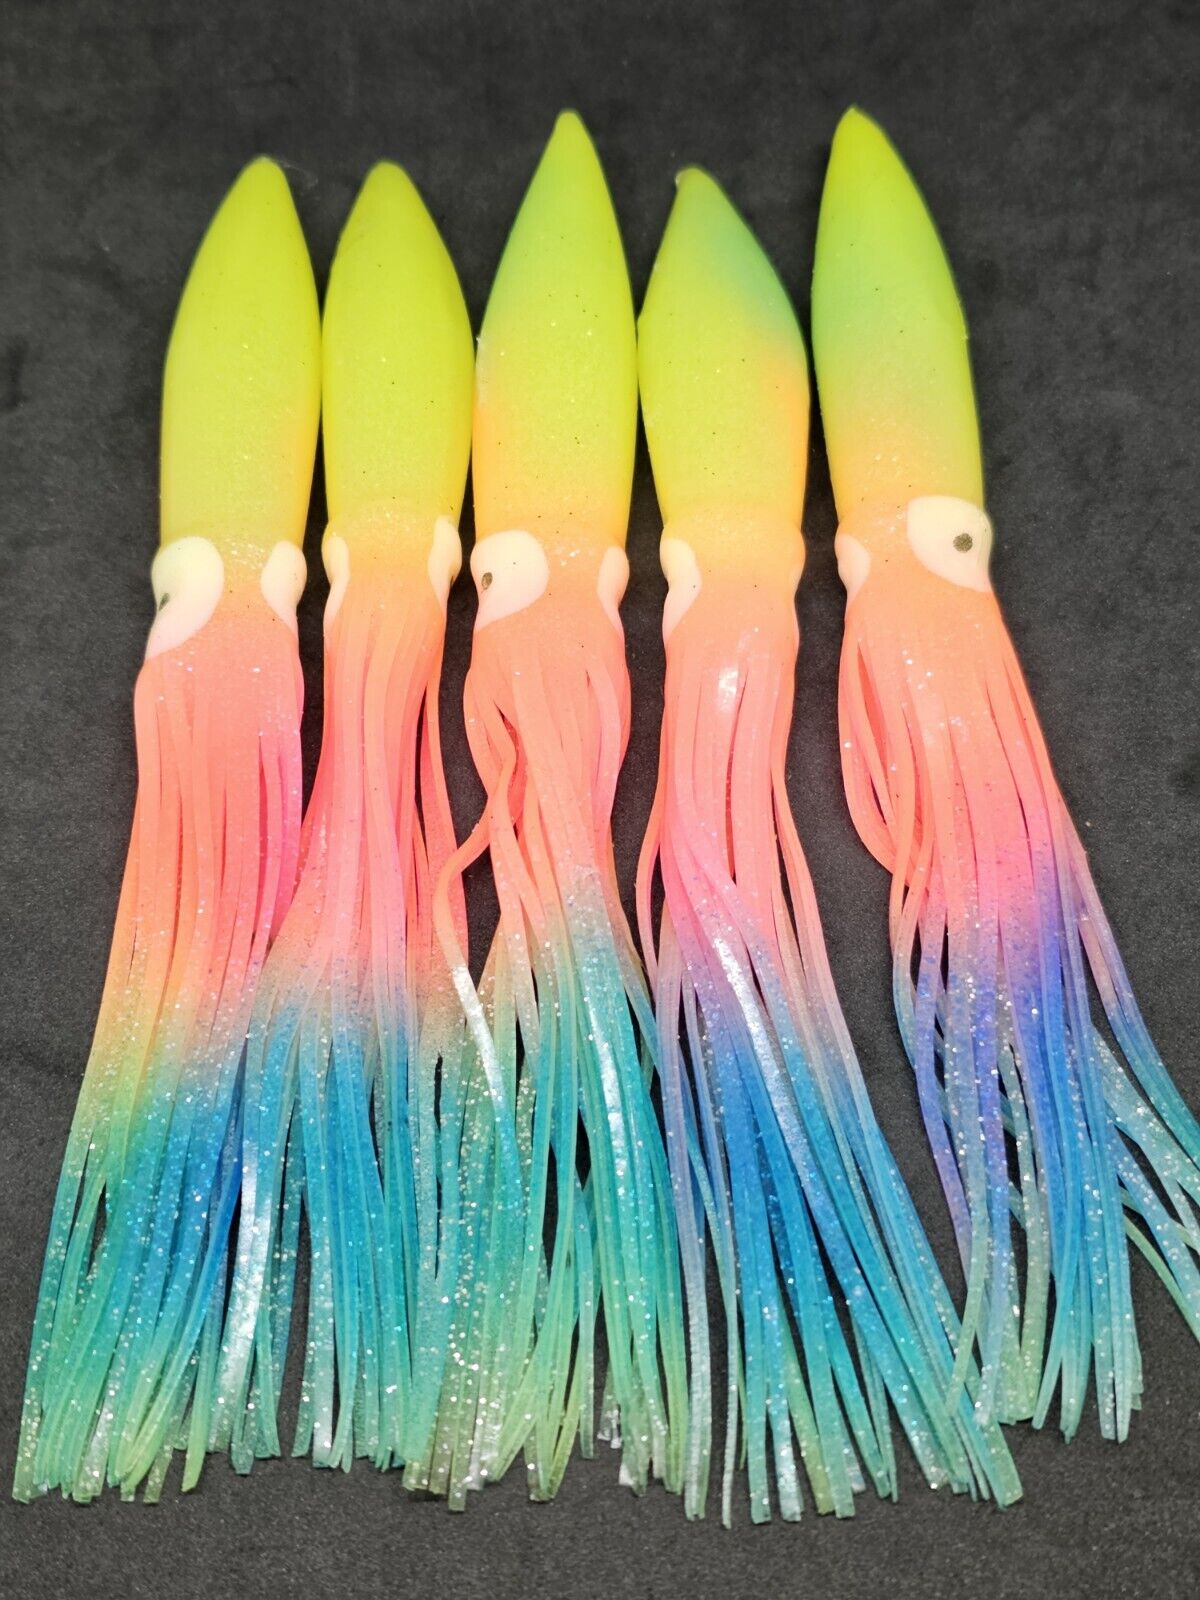 5x Game Fishing Lures Skirted Trolling Lure Squid Skirts Marlin